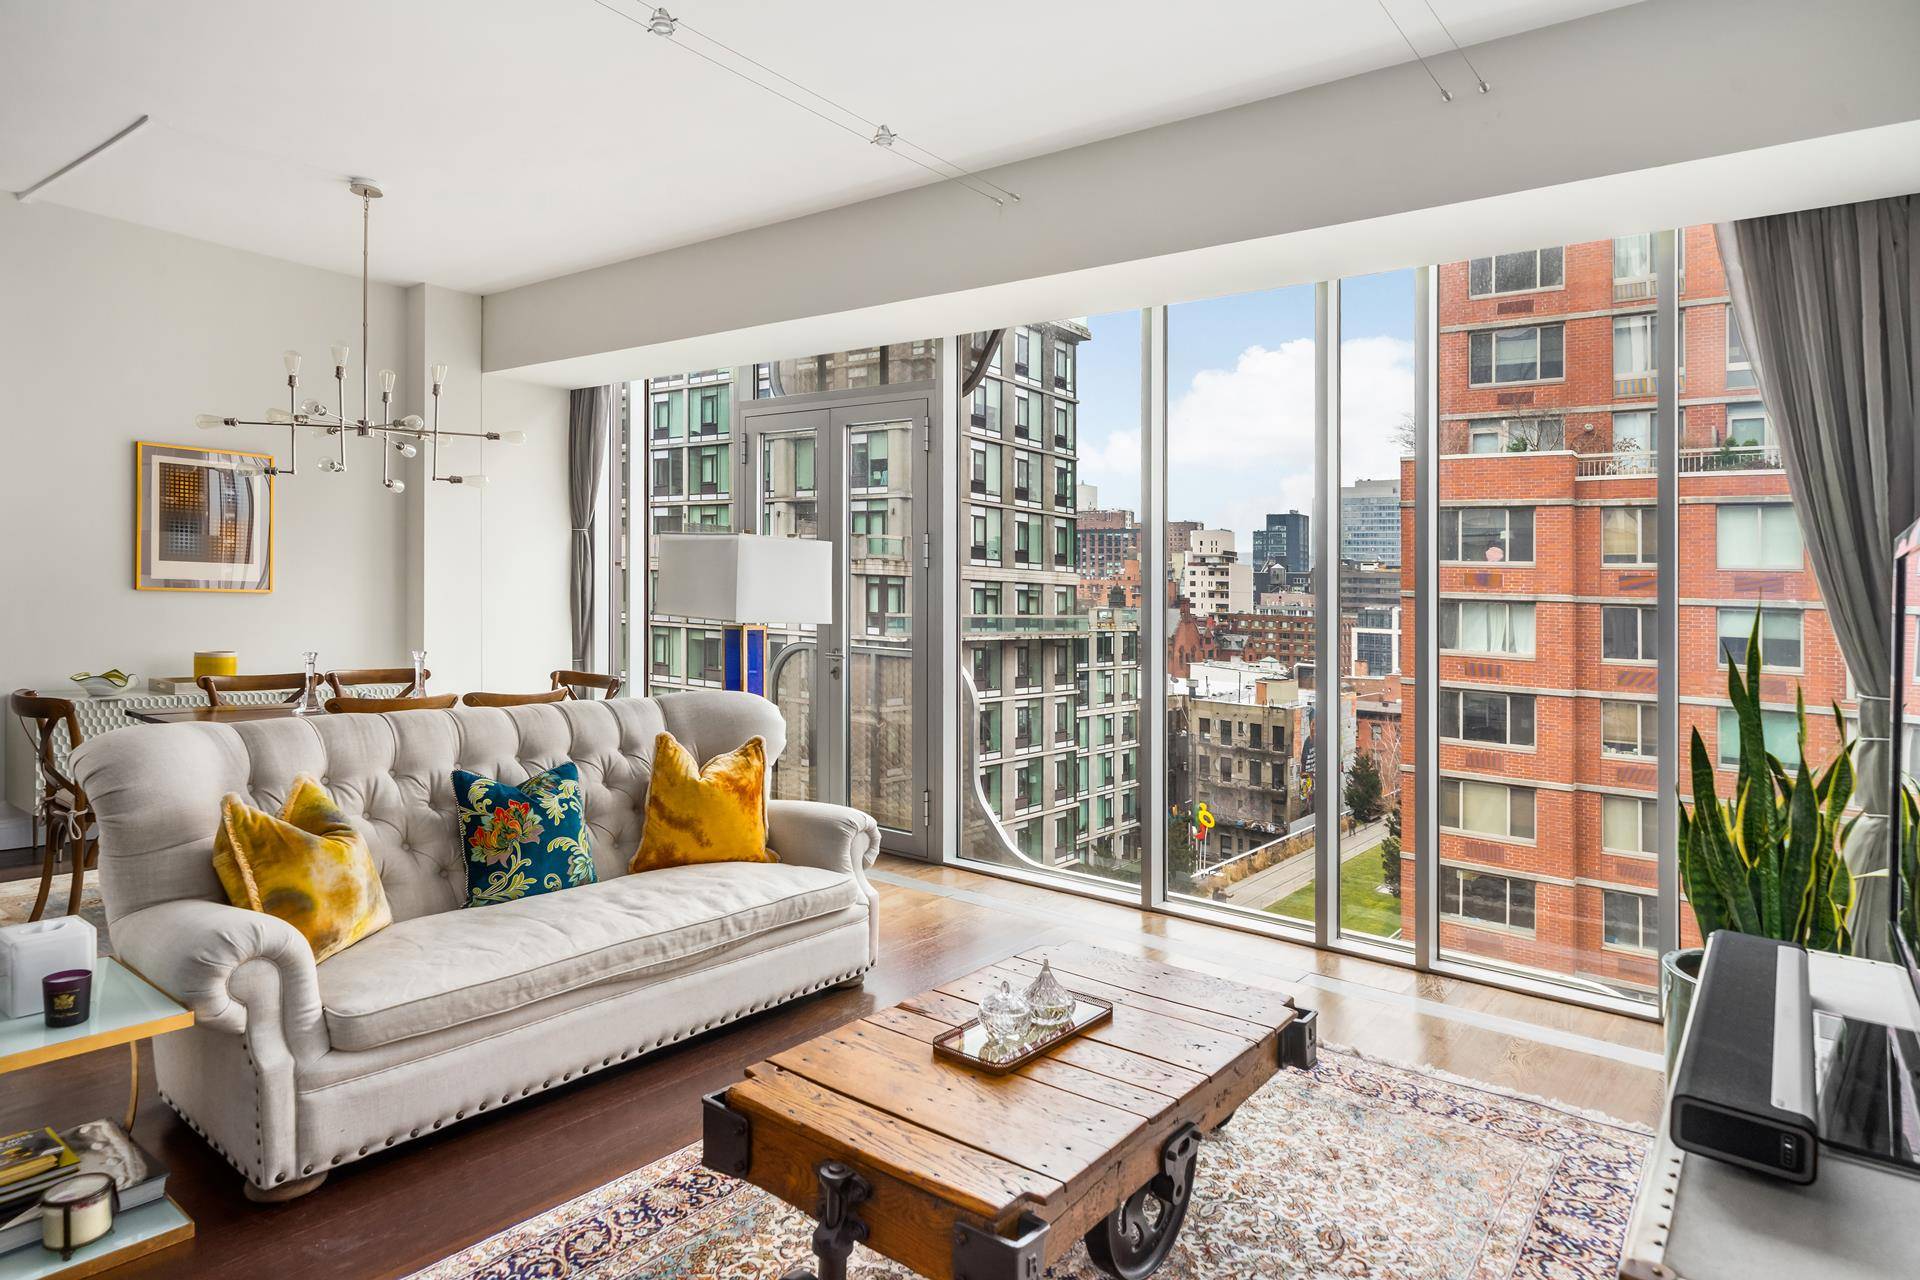 Phenomenal Full Floor Chelsea 2Bdr 2Bth CONDO One of the best values in Western Chelsea this floor through residence with 10' ceilings measures approximately 1700sf and has direct views over ...